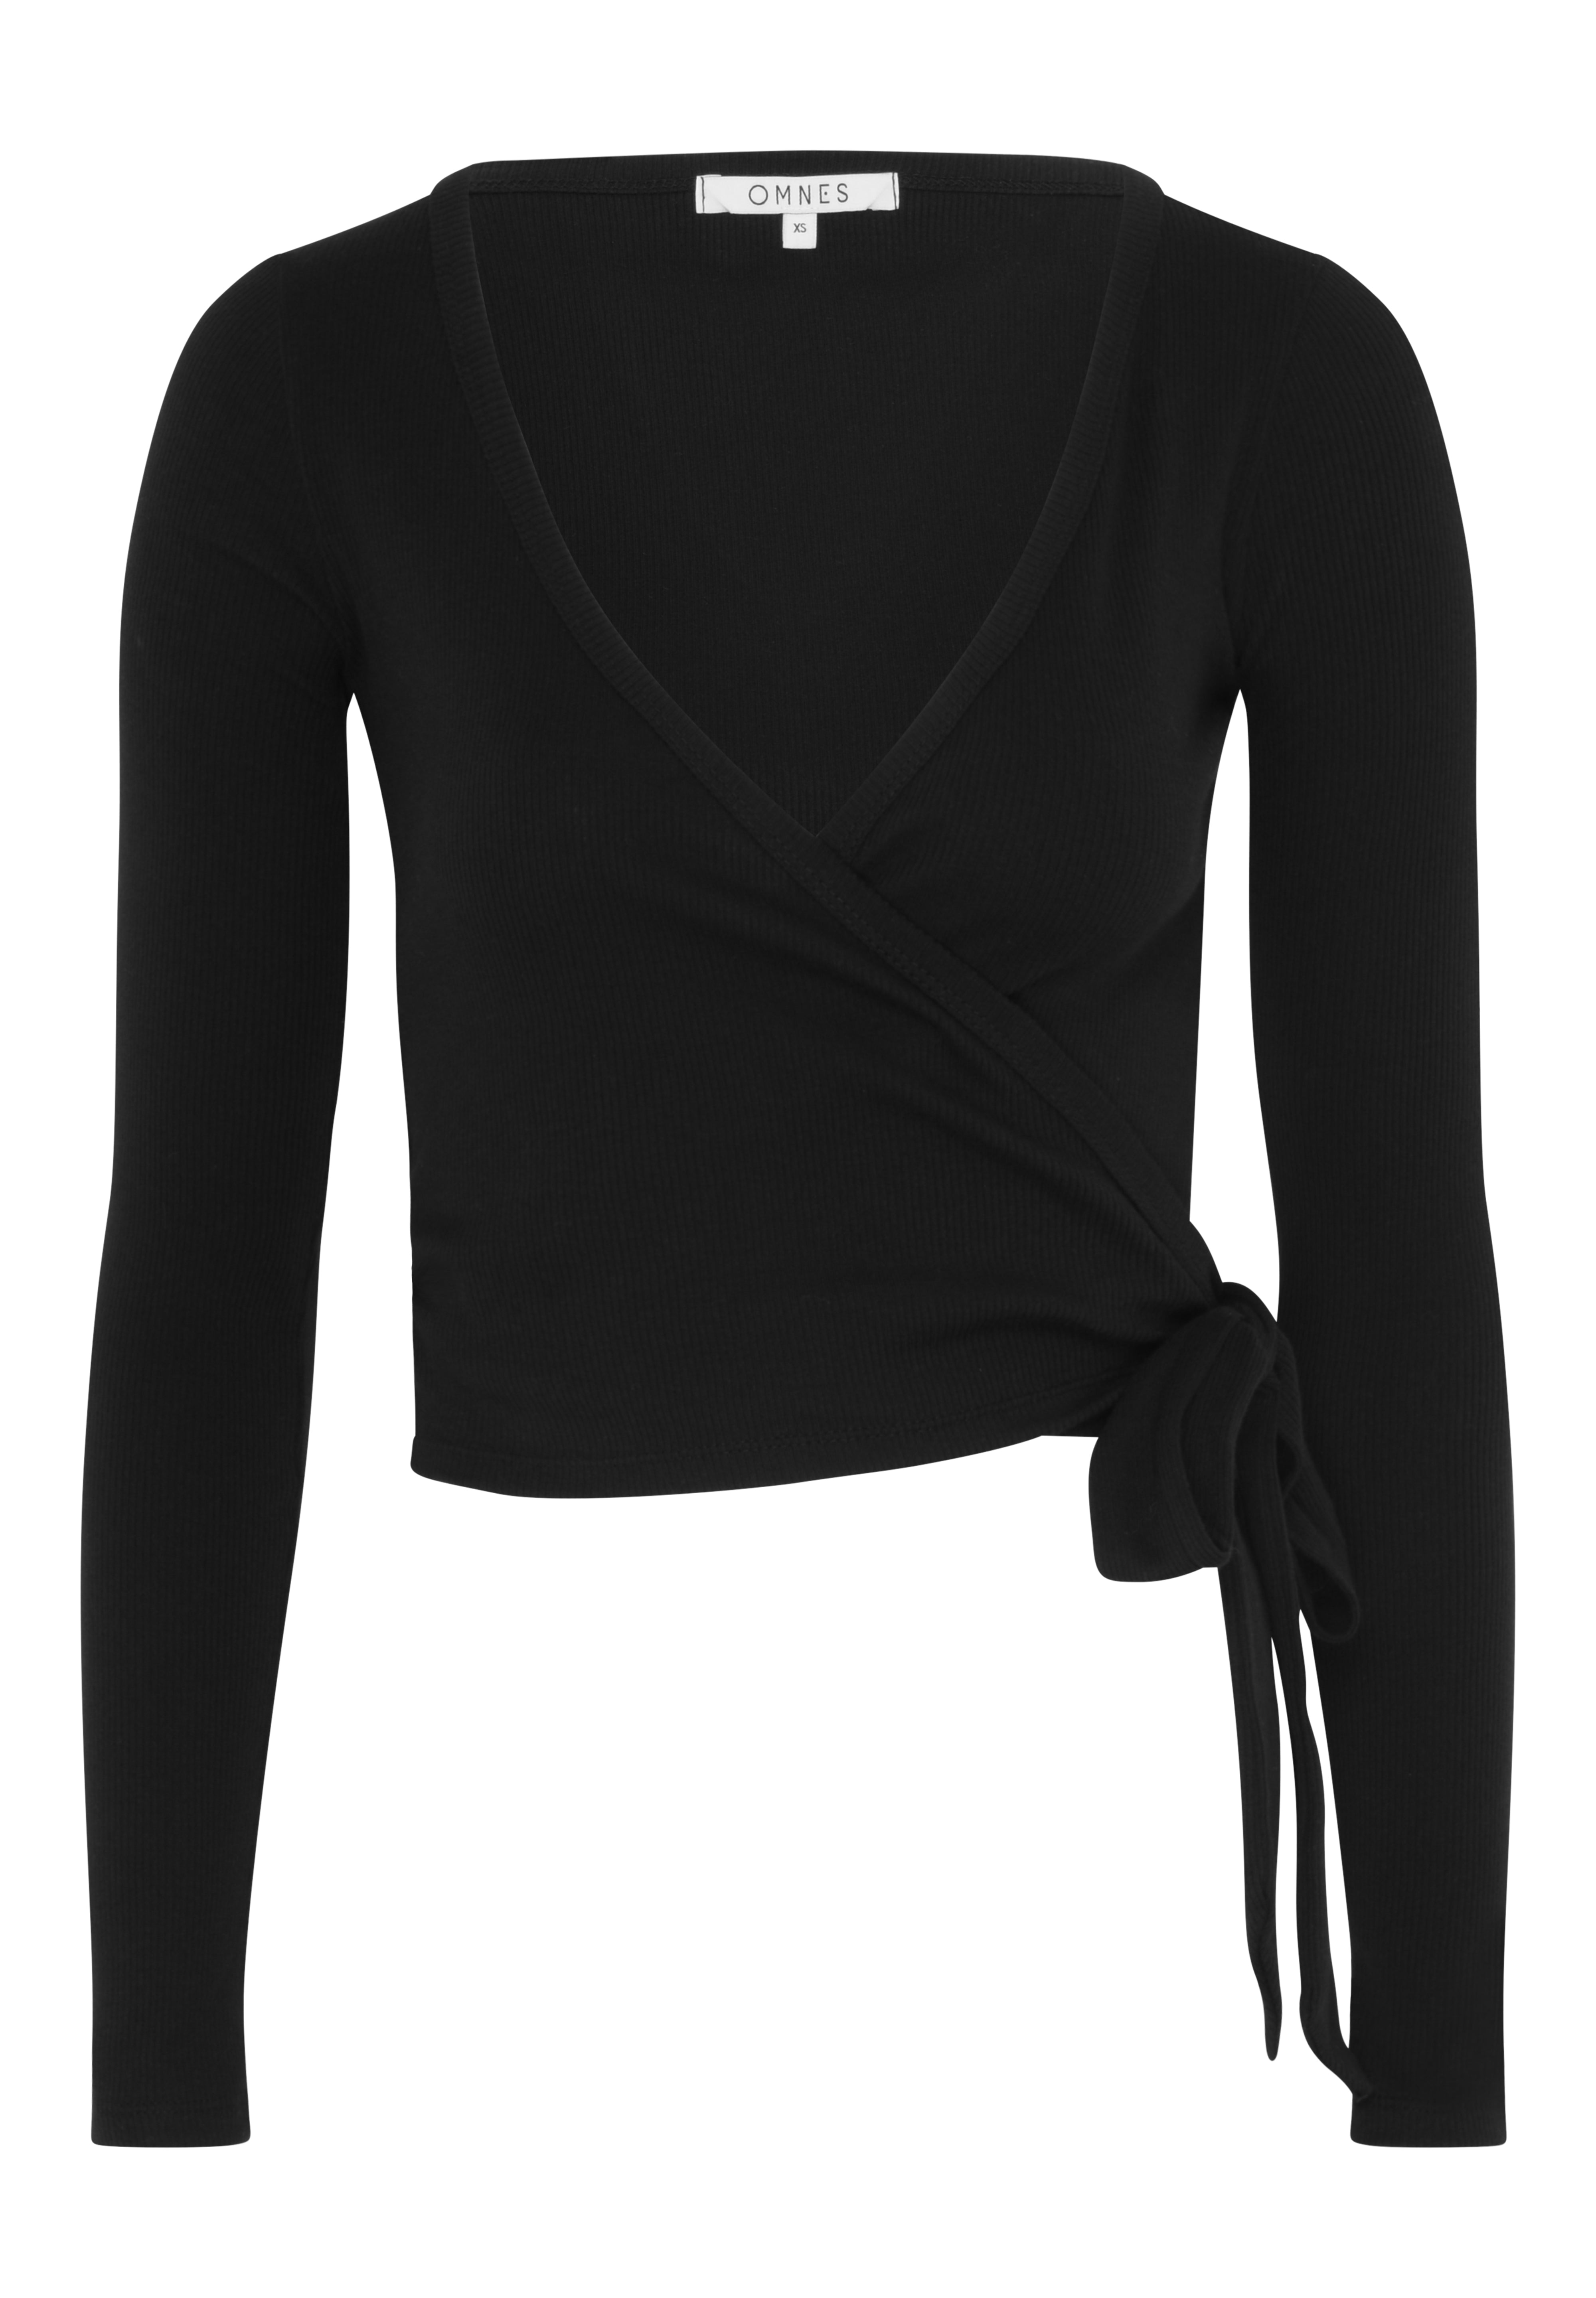 Napeta Ballet Wrap Top in Black | Tops | Sustainable & Affordable ...